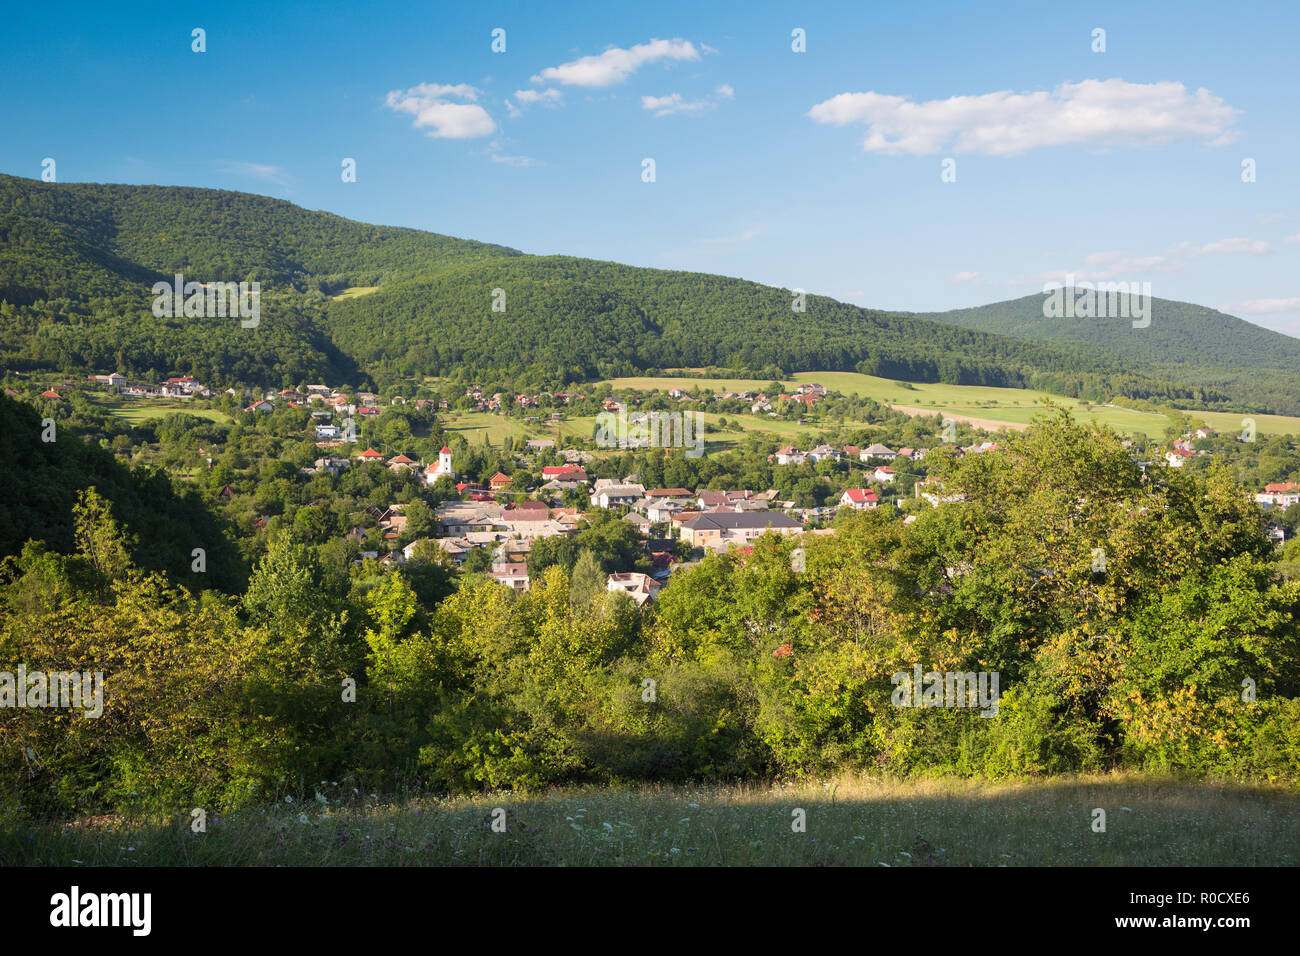 Slovakia - The landscape of Gemer and with the Rakovnica village. Stock Photo